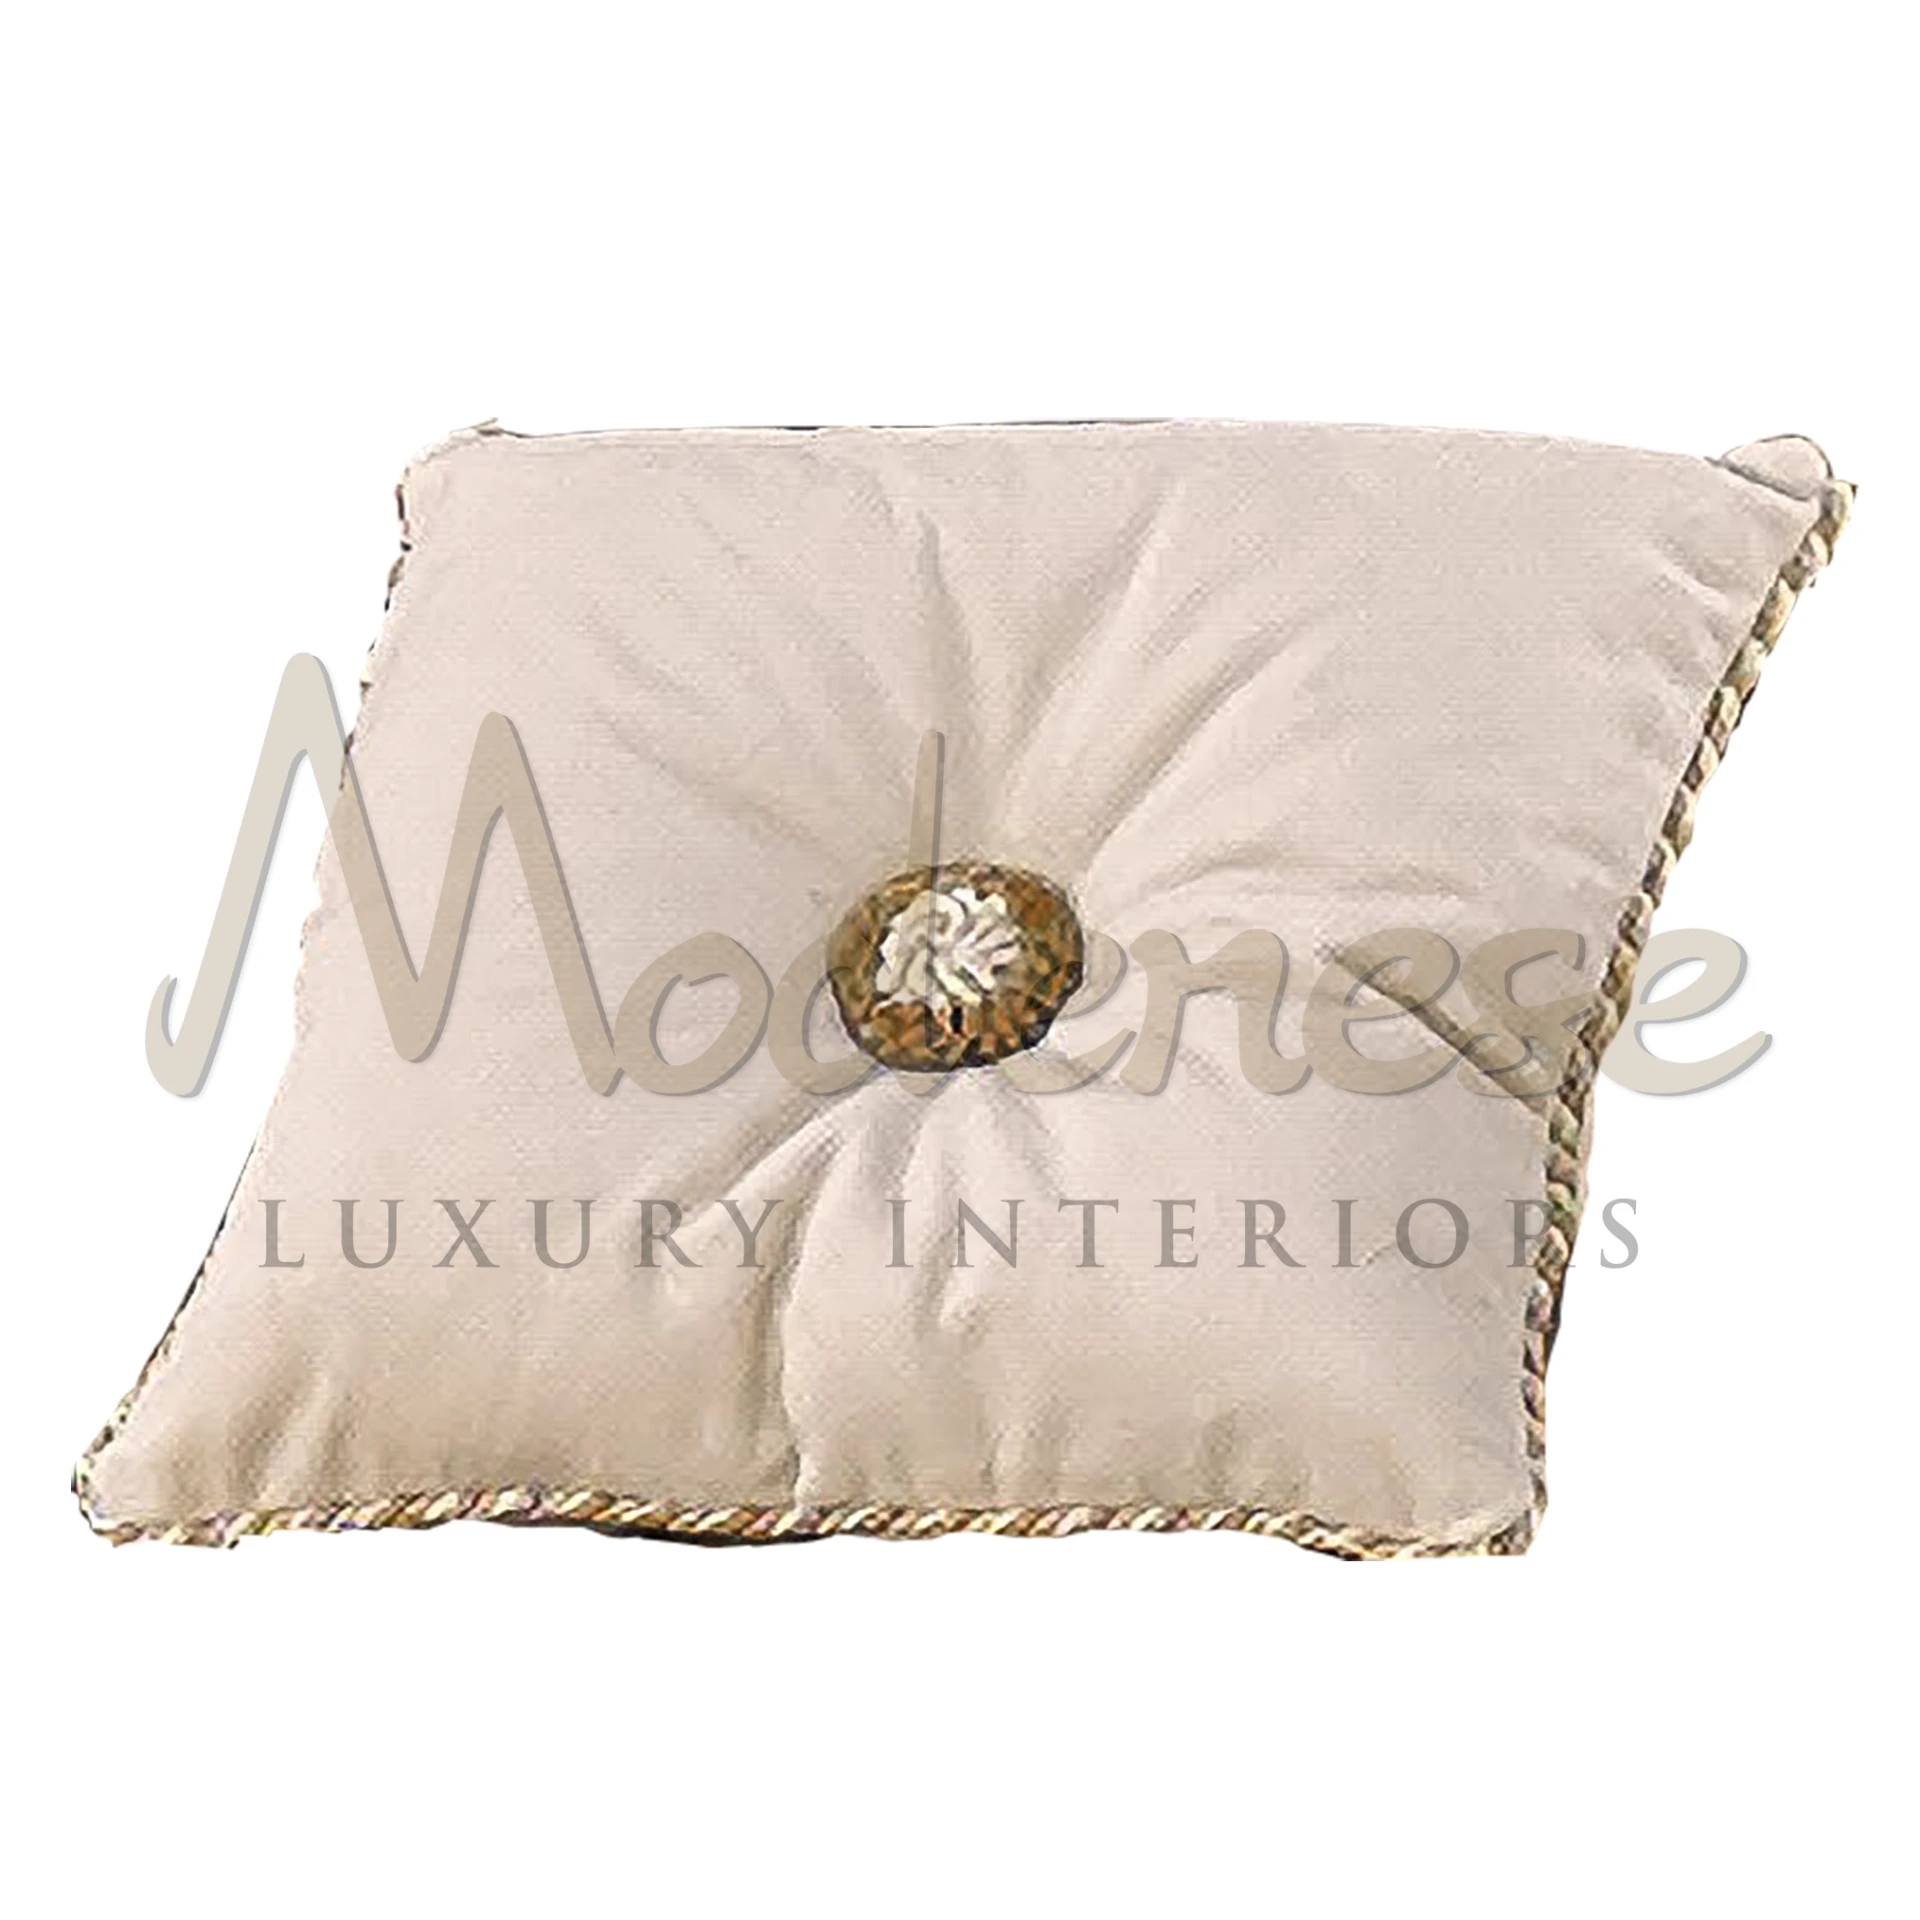 Modenese Stunning Pillow with eye-catching design, crafted from luxury Italian textiles.